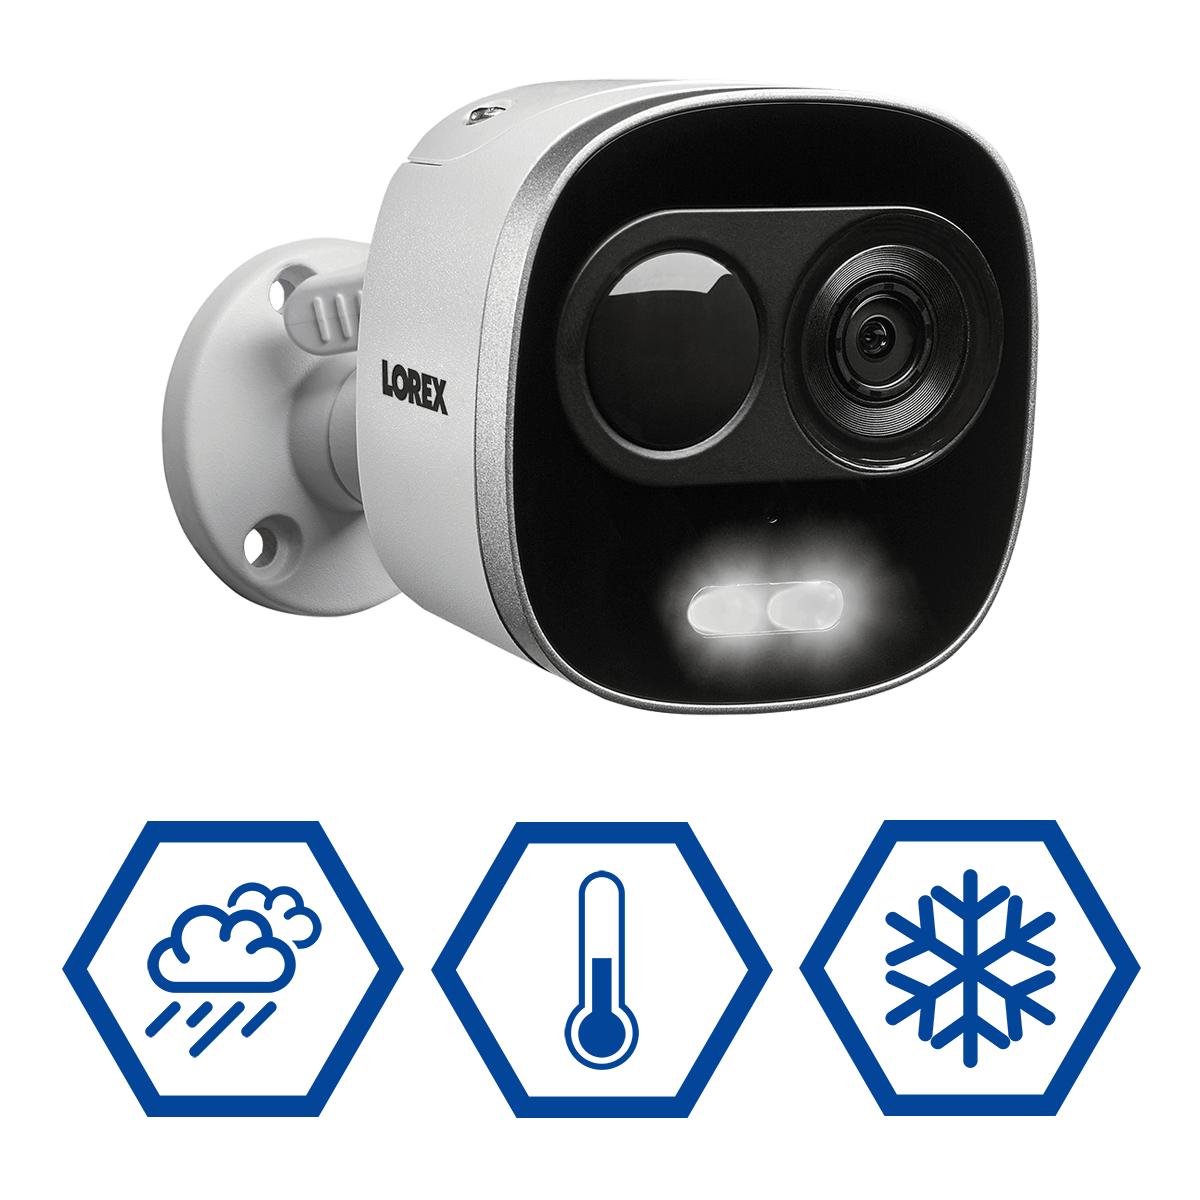 LNB8105X 4K weatherproof security camera for year-round protection